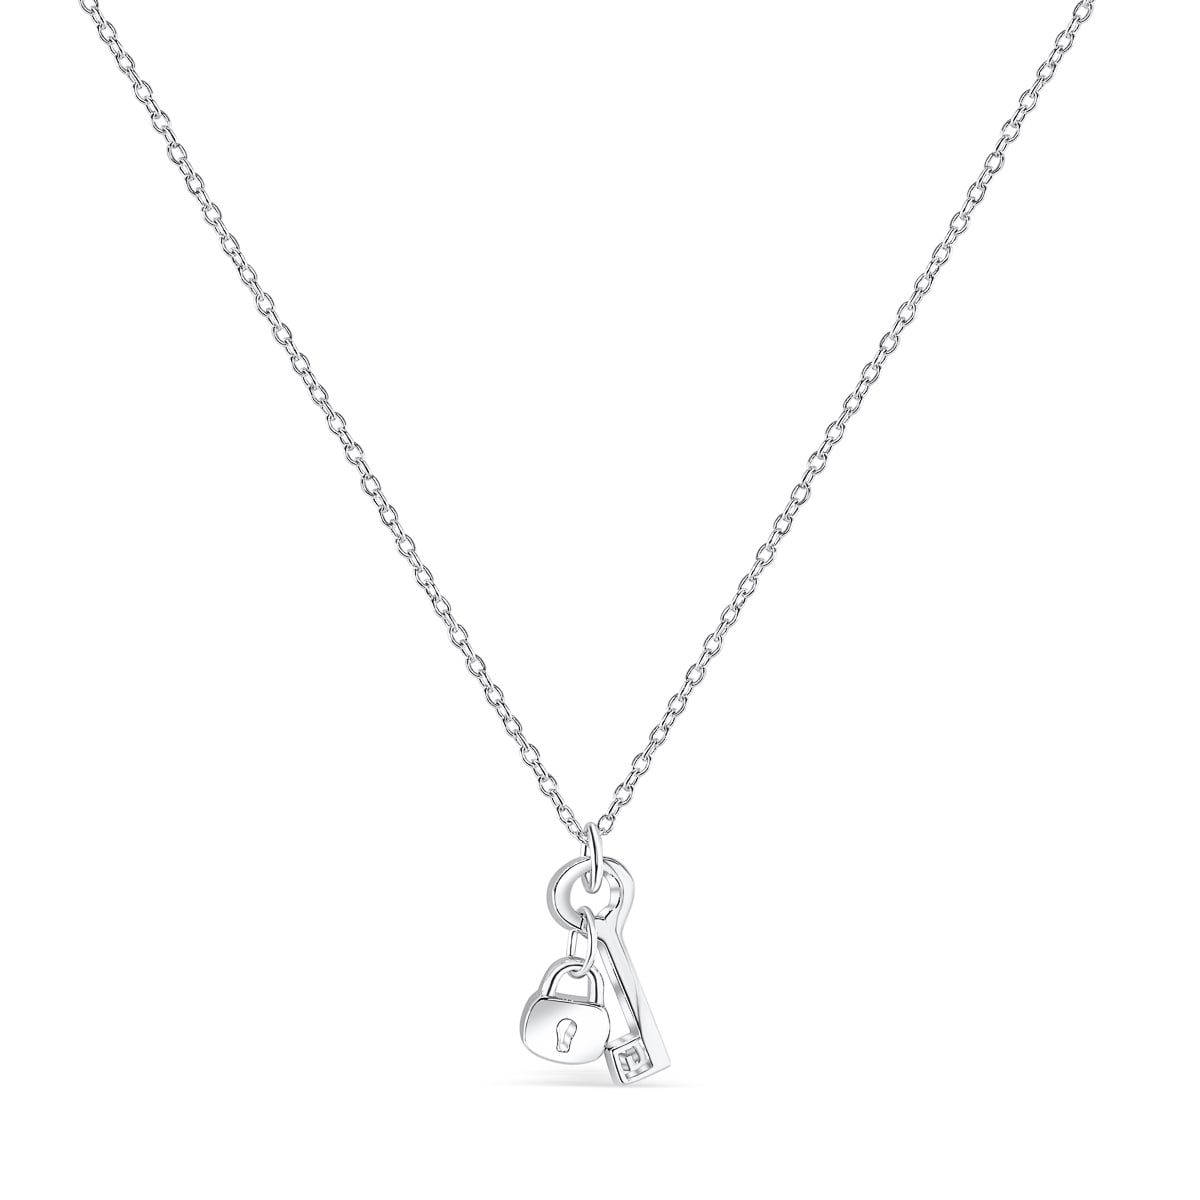 925 silver lock and key necklace